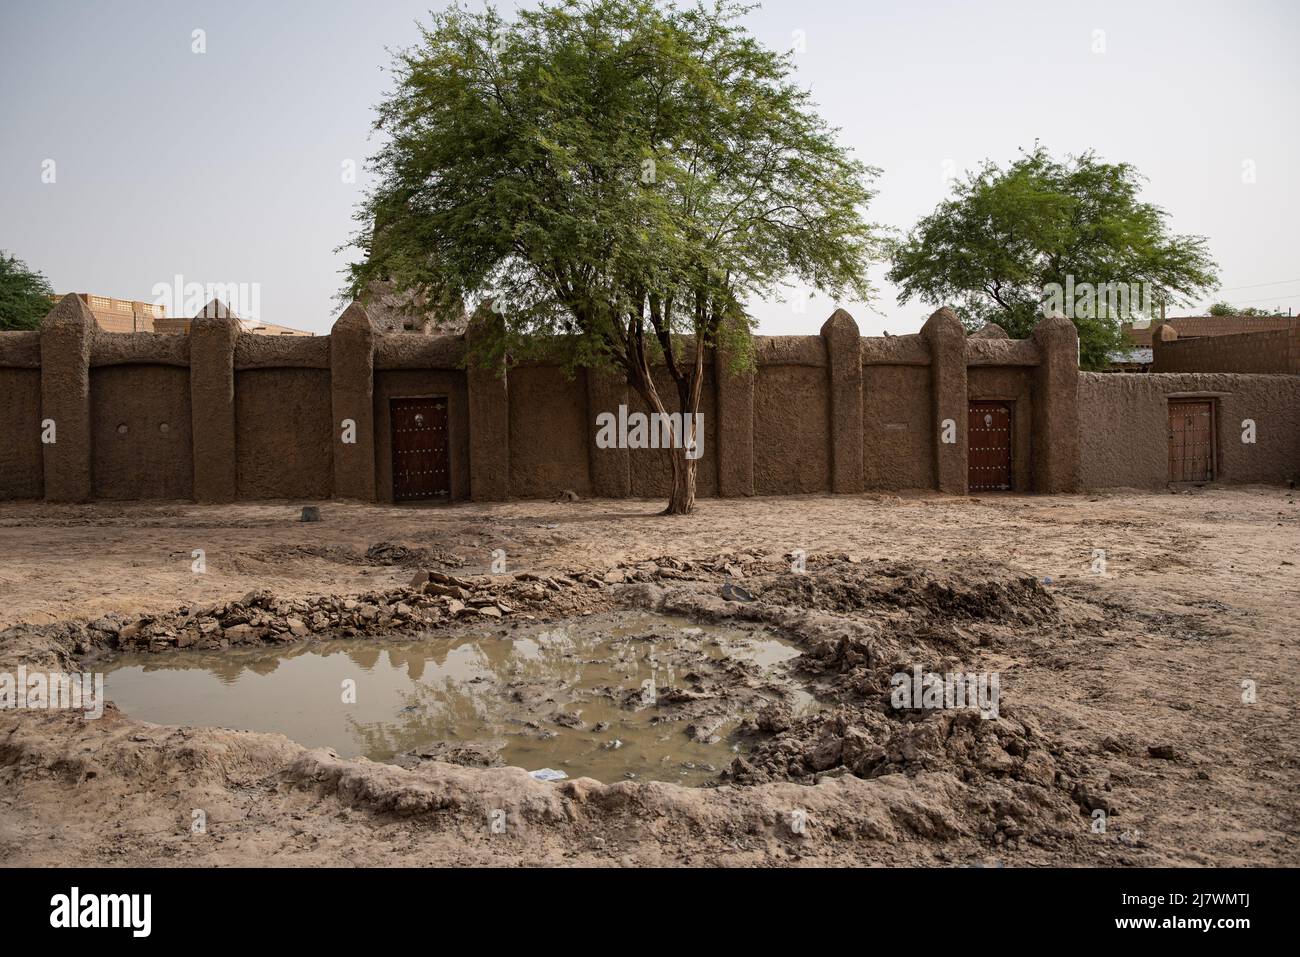 Nicolas Remene / Le Pictorium -  The Sankore mosque in Timbuktu. -  27/9/2021  -  Mali / Timbuktu / Timbuktu  -  A small pond with banco used for the Stock Photo